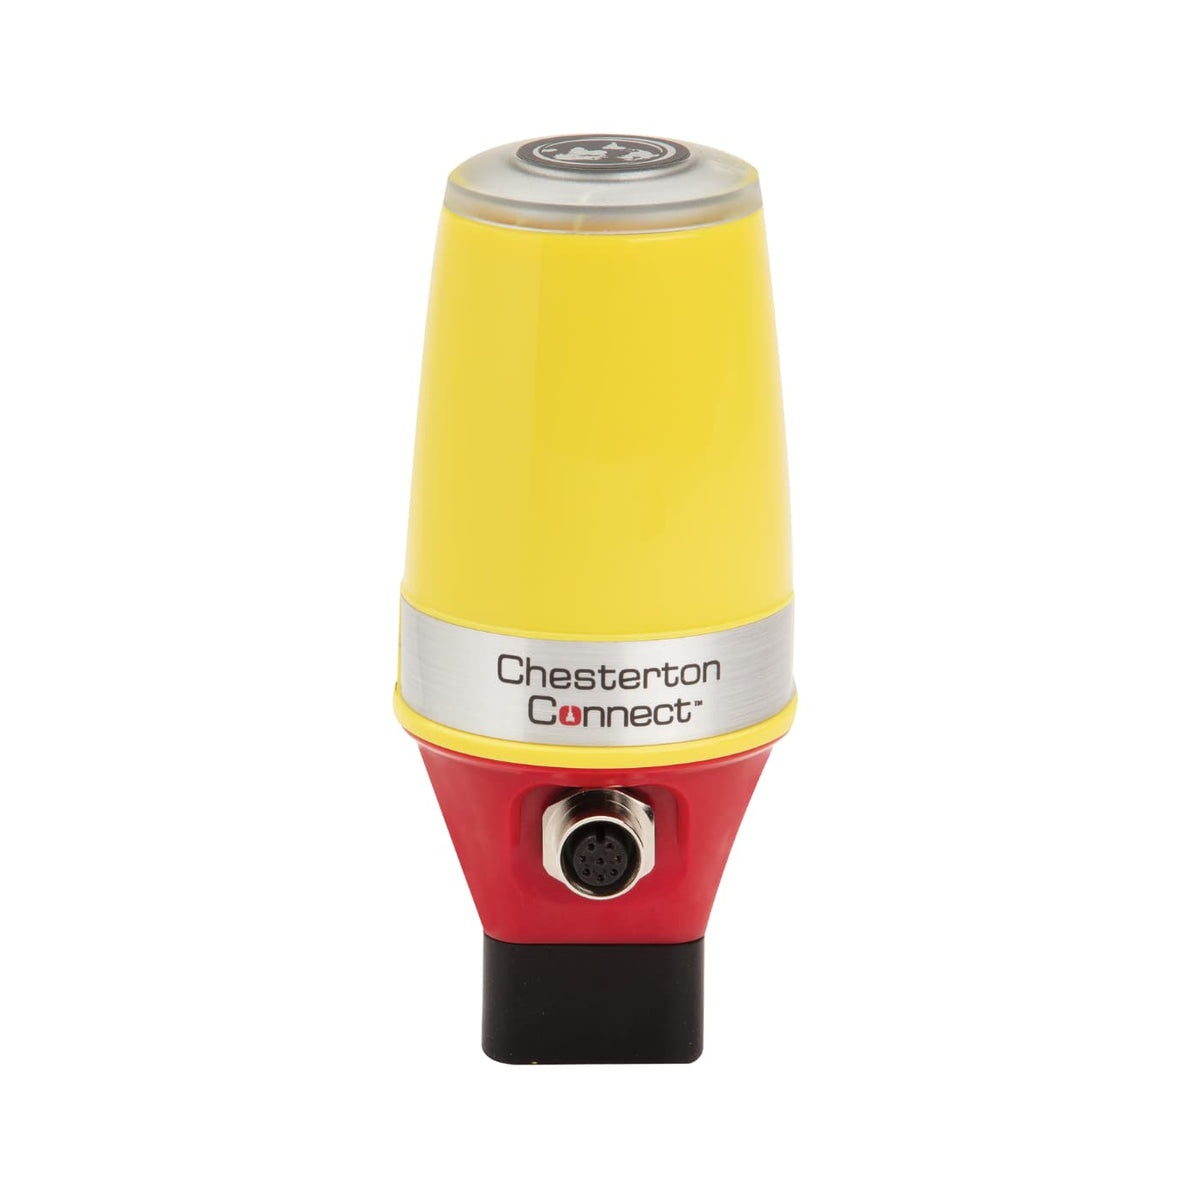 Chesterton Connect Intrinsically Safe Certified Sensor